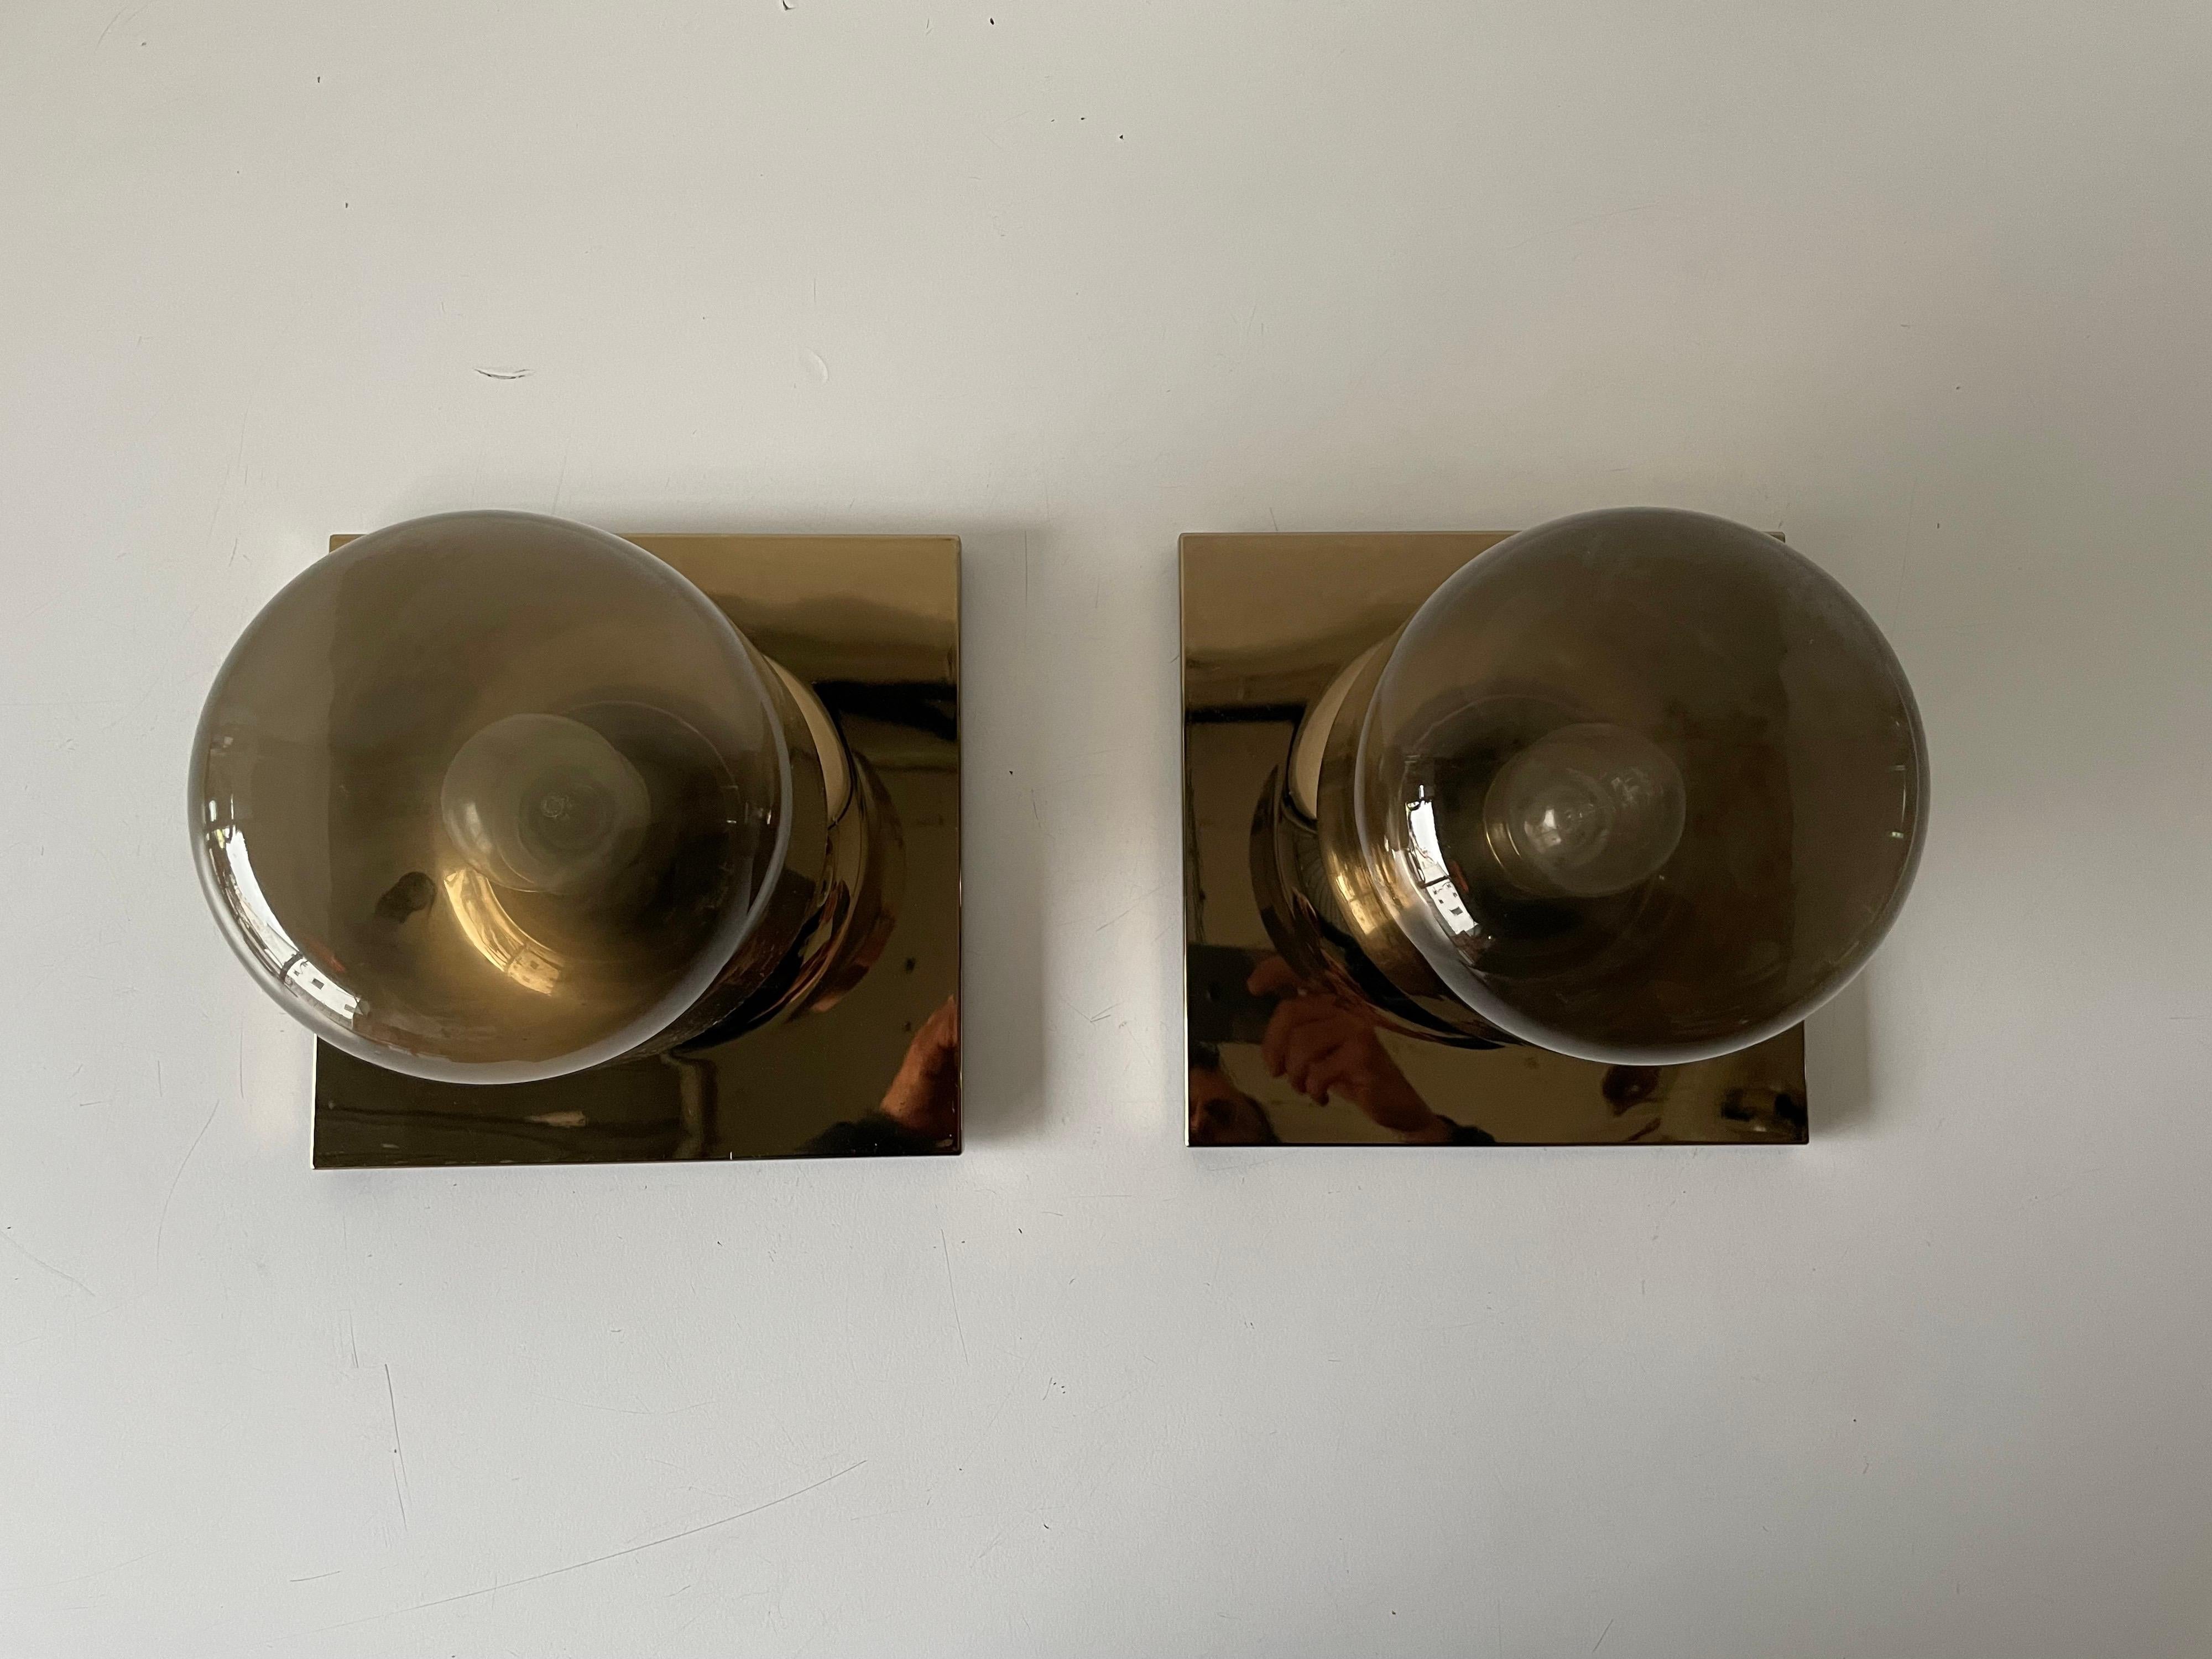 Metal Pair of Wall or Ceiling Lamps by Motoko Ishii for Staff, 1960s, Germany